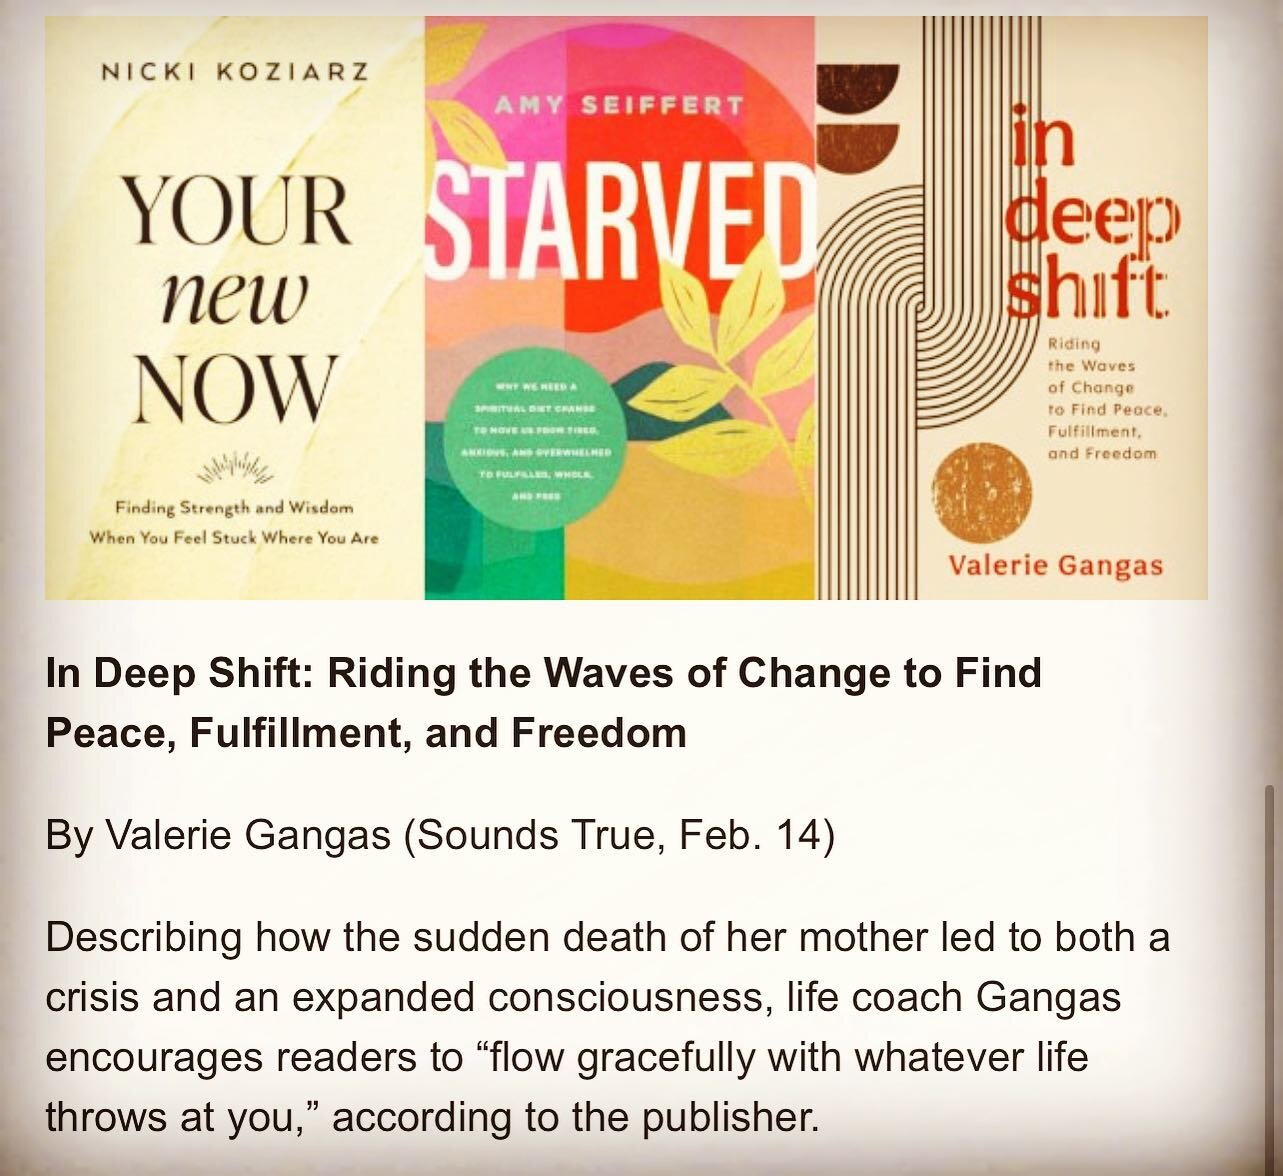 Pretty darn excited to share that my book, &ldquo;In Deep Shift&rdquo; was selected by Publishers Weekly for their list of Books for a New Spiritual You!

Being an author was a dream of mine, so to not only have my book published, but to be recognize